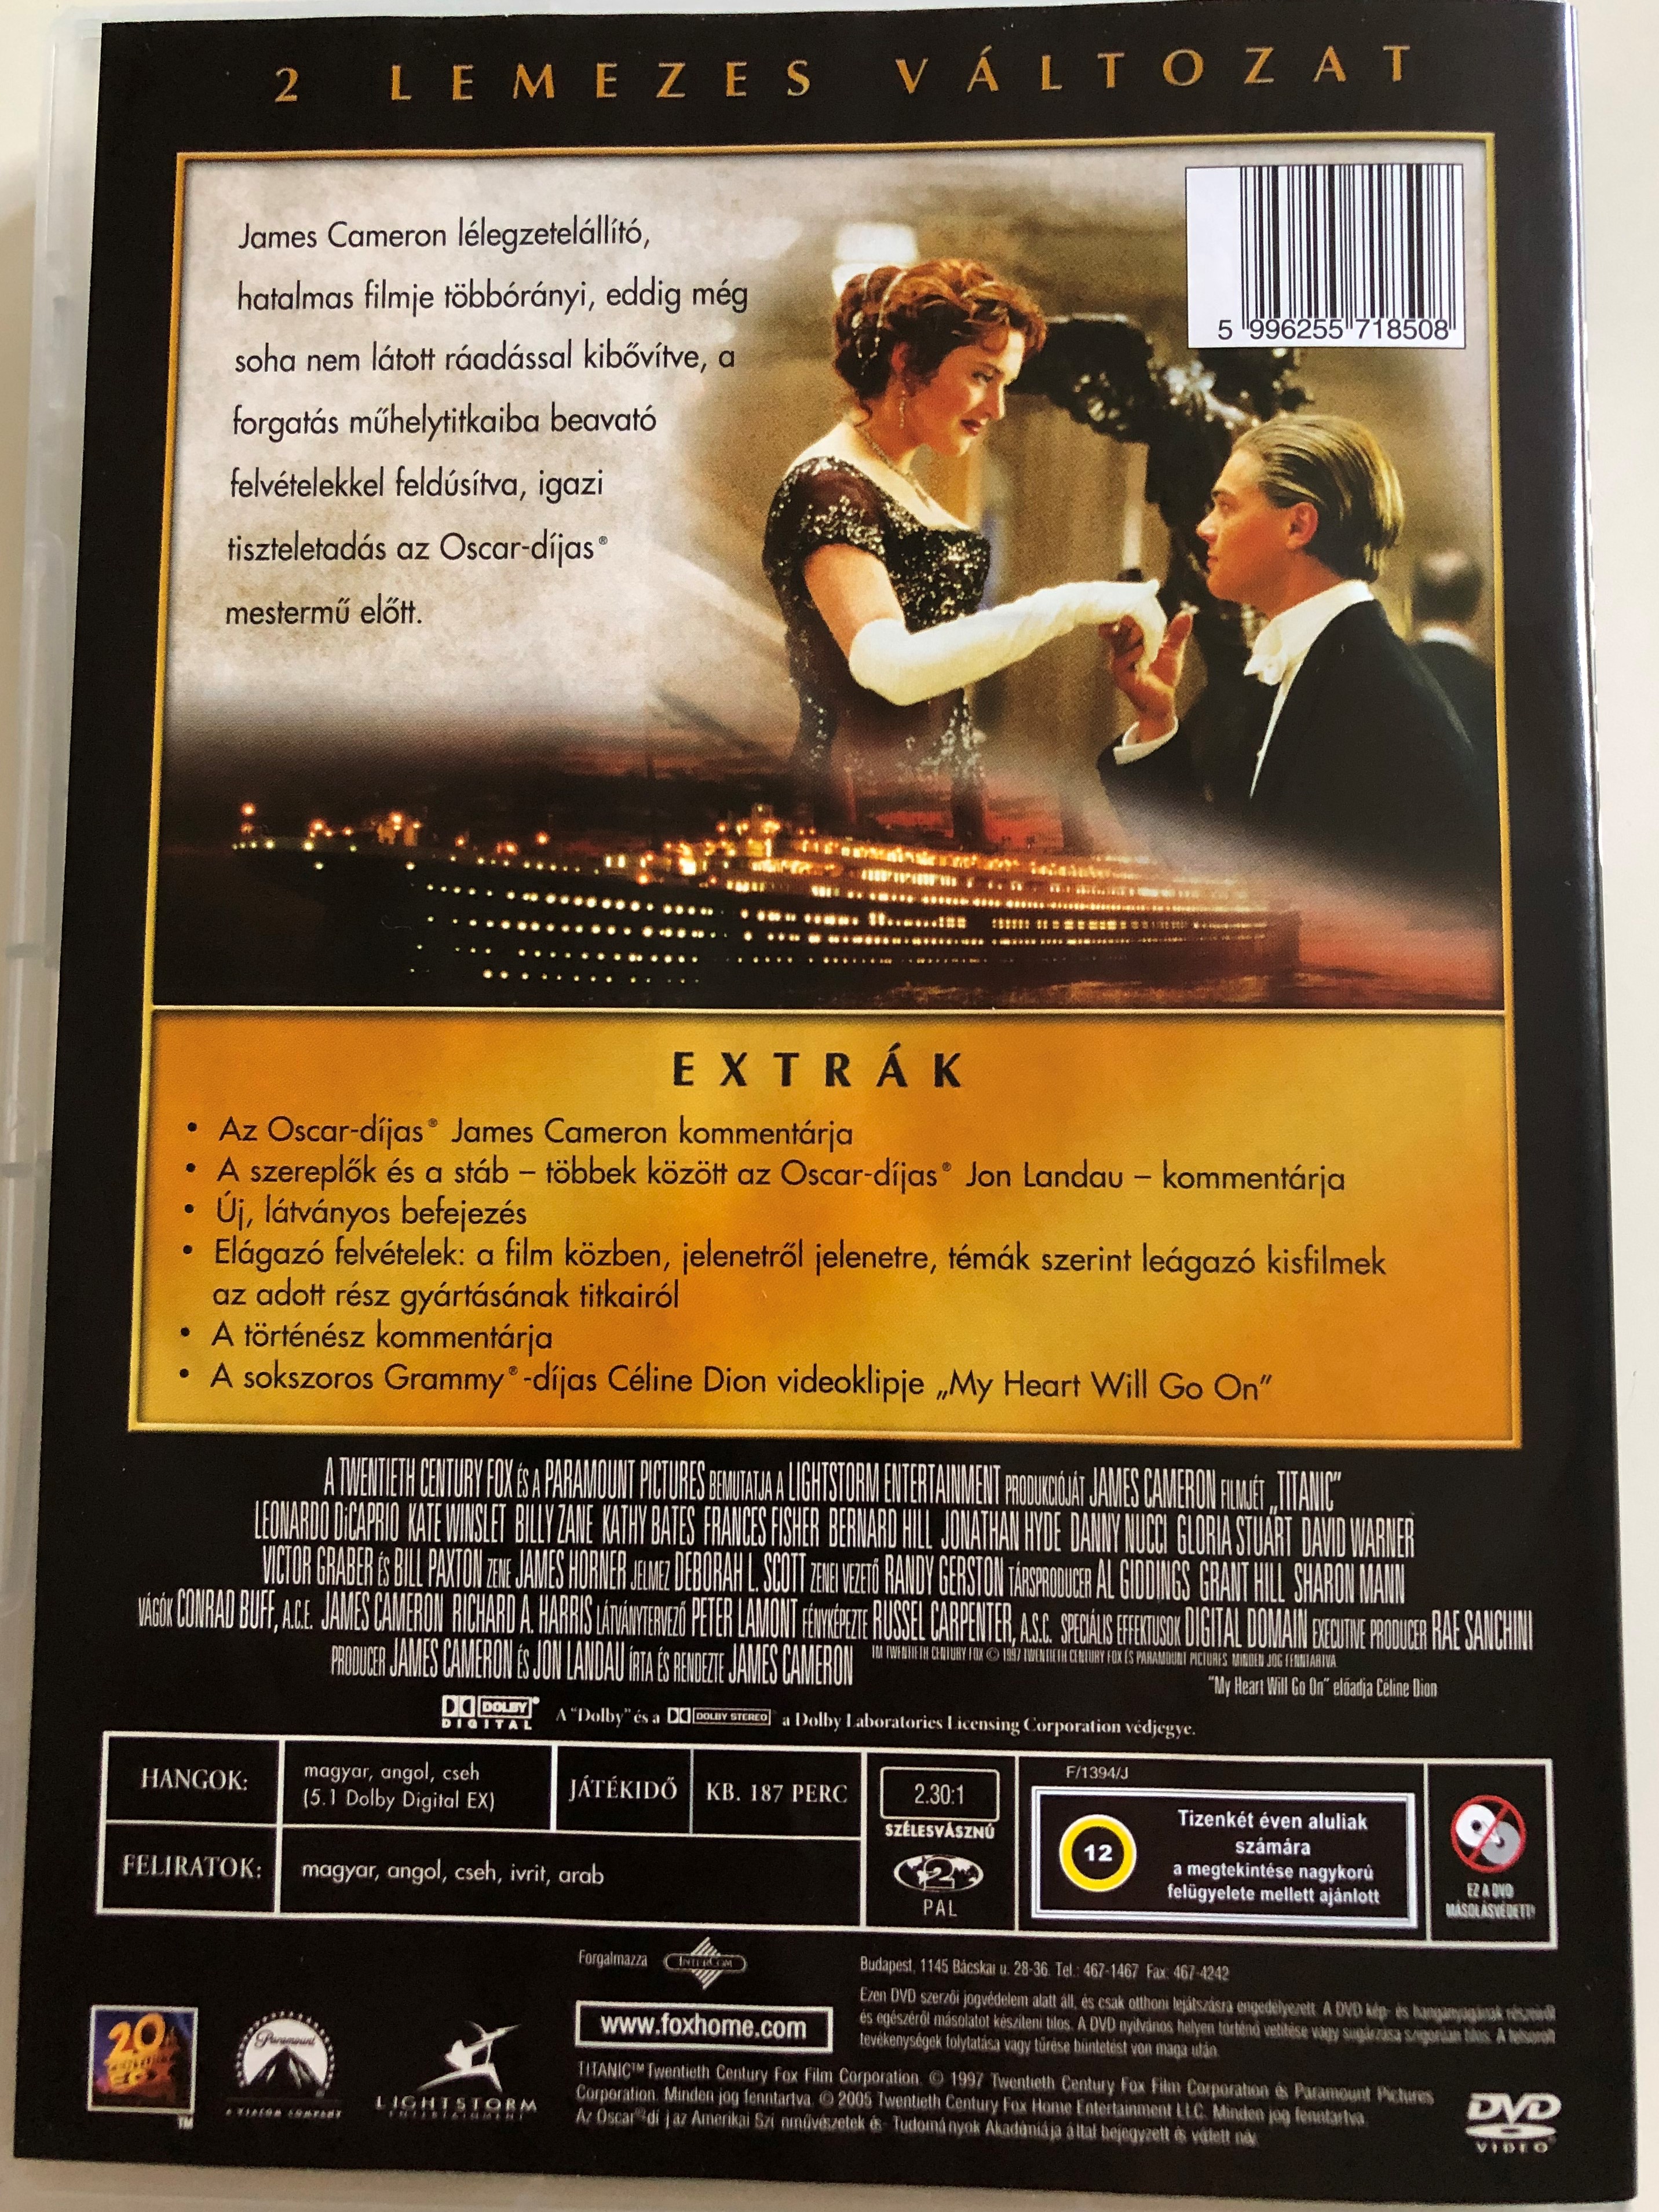 Titanic 1997 DVD Deluxe Collectors Edition / 2 DVD / Directed by James  Cameron / Starring: Leonardo DiCaprio, Kate Winslet, Billy Zane, Kathy  Bates, Frances Fisher, Bernard Hill - bibleinmylanguage